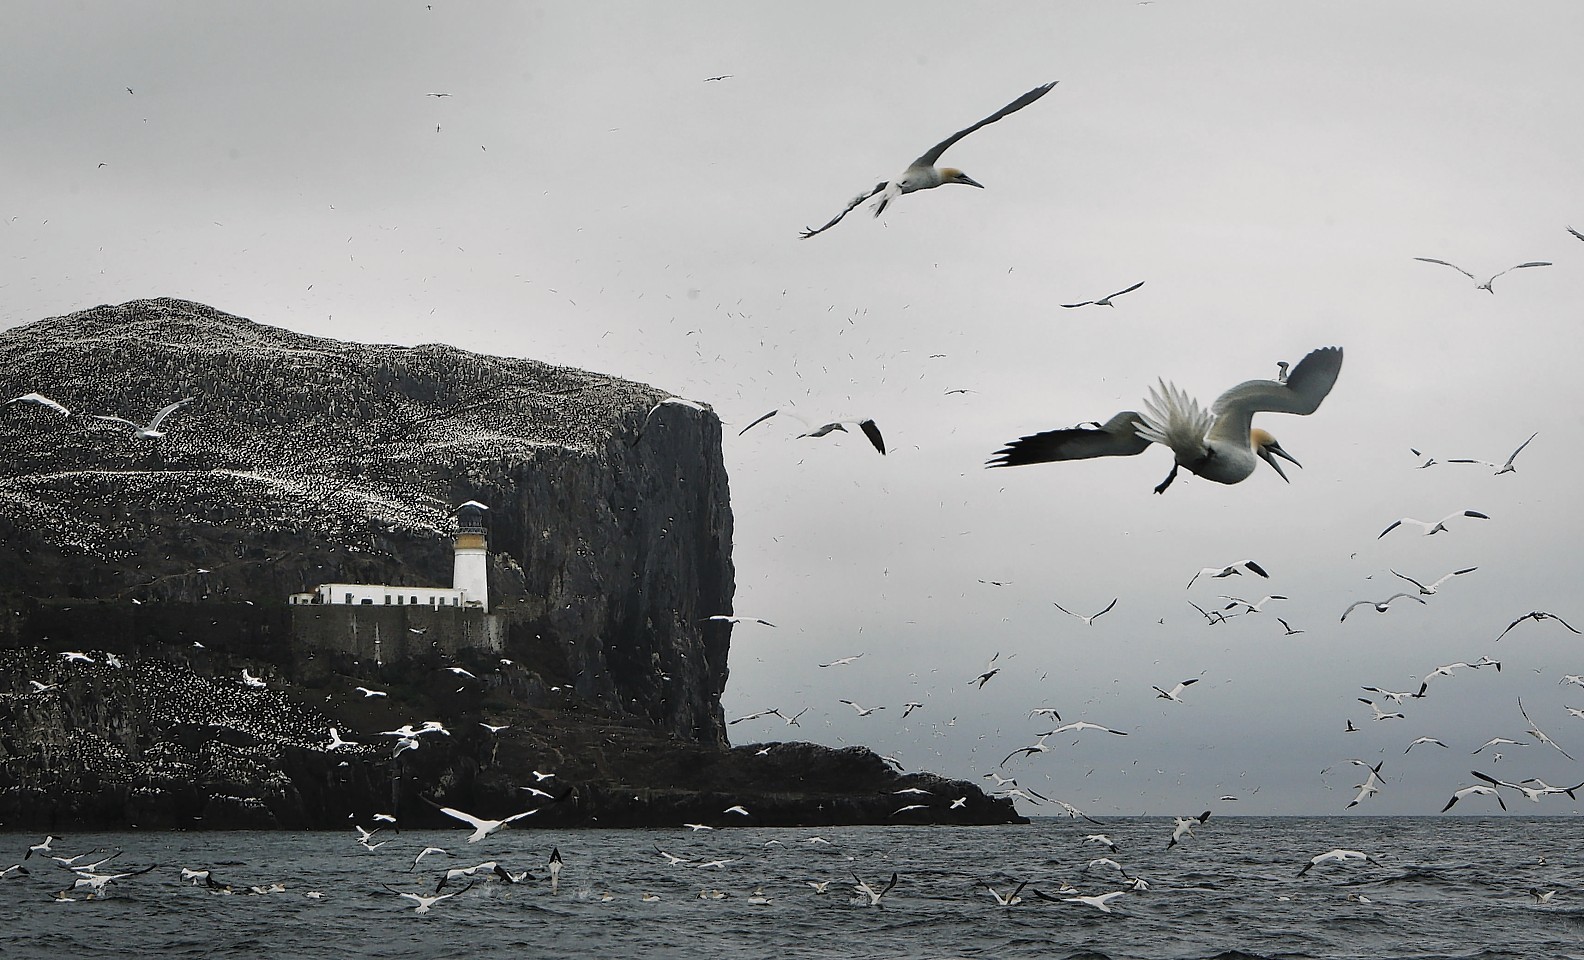  Gannets during the breeding season on  Bass Rock, the largest single island gannet colony in the world, which lies in the Firth of Forth off the coast of Scotland.